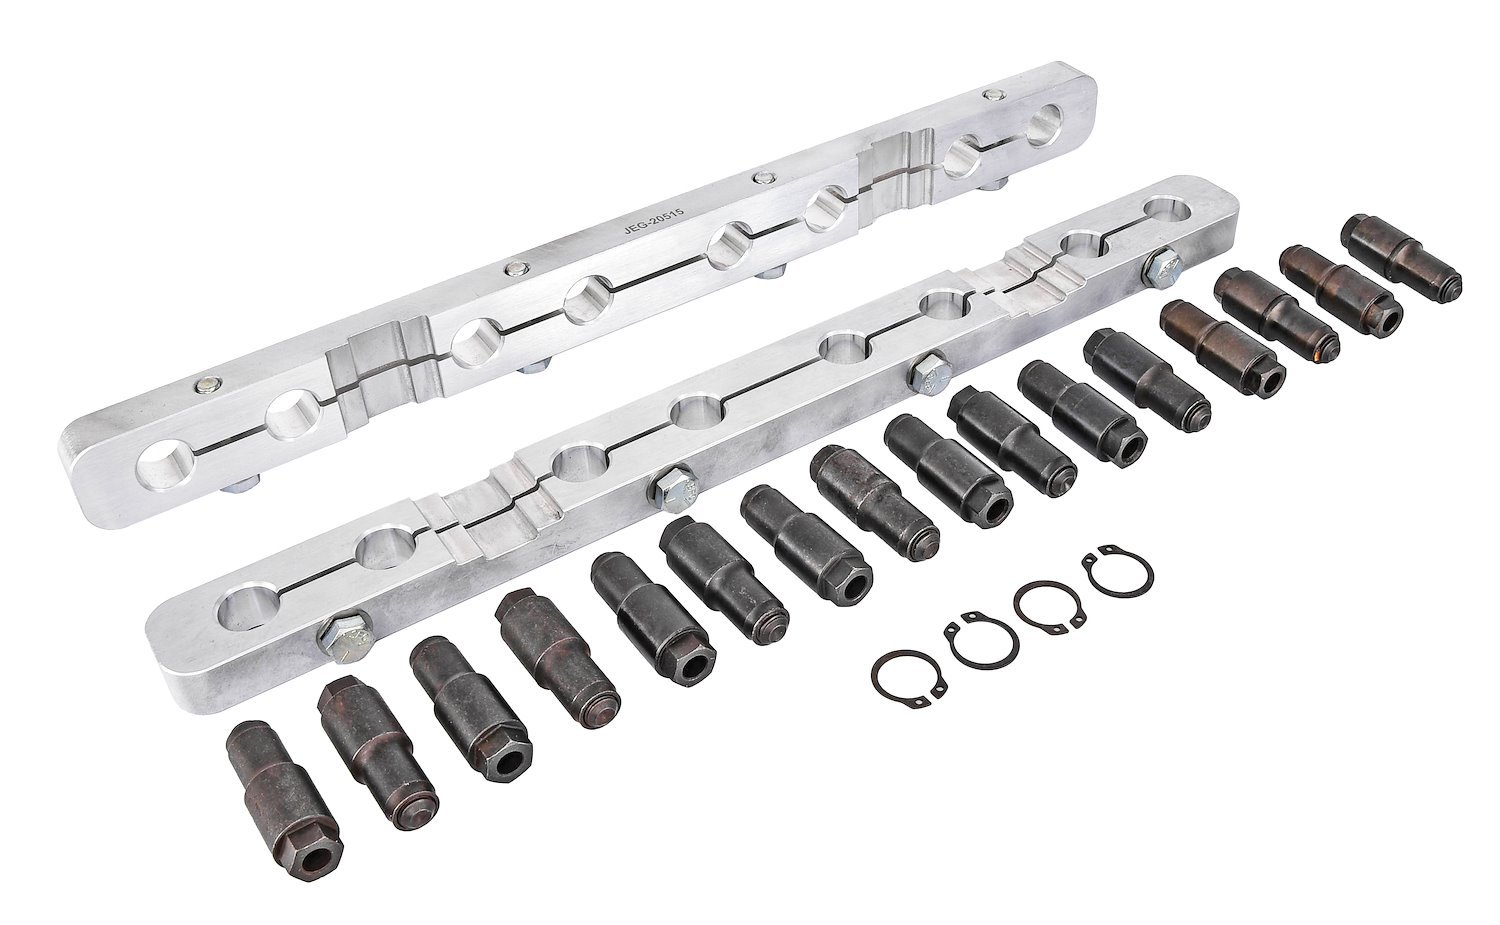 Stud Girdle Kit Fits Standard Design 1955-2000 Small Block Chevy Heads [7/16 in. Studs]